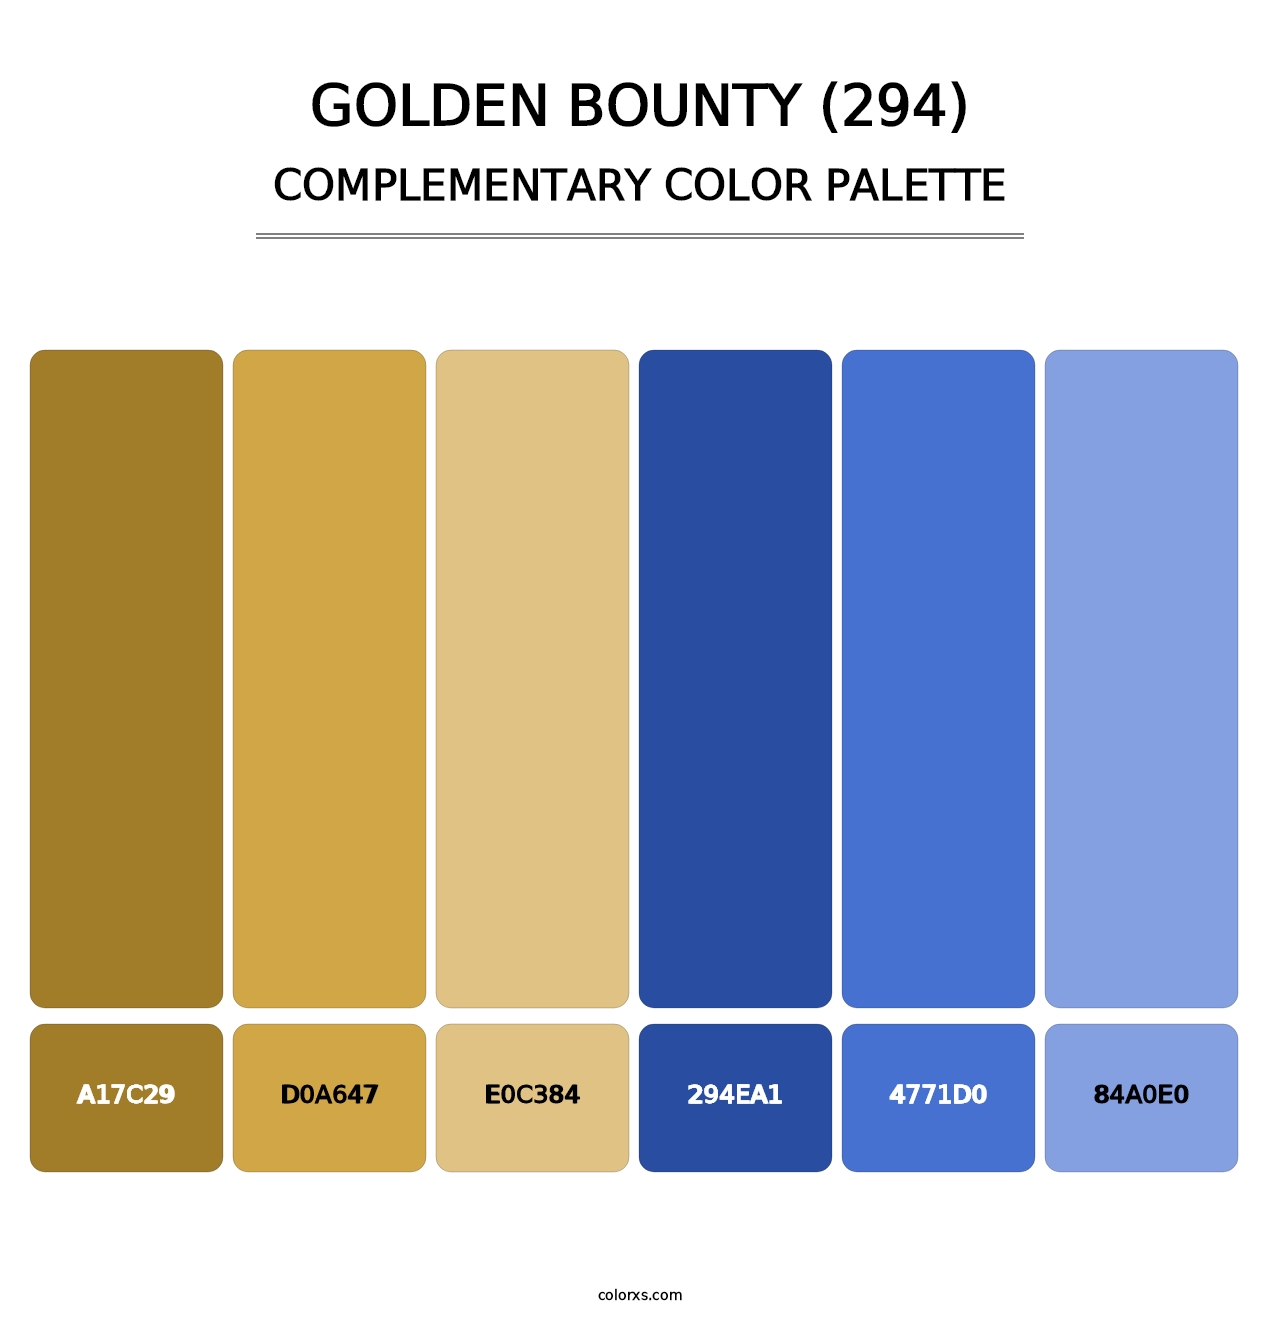 Golden Bounty (294) - Complementary Color Palette